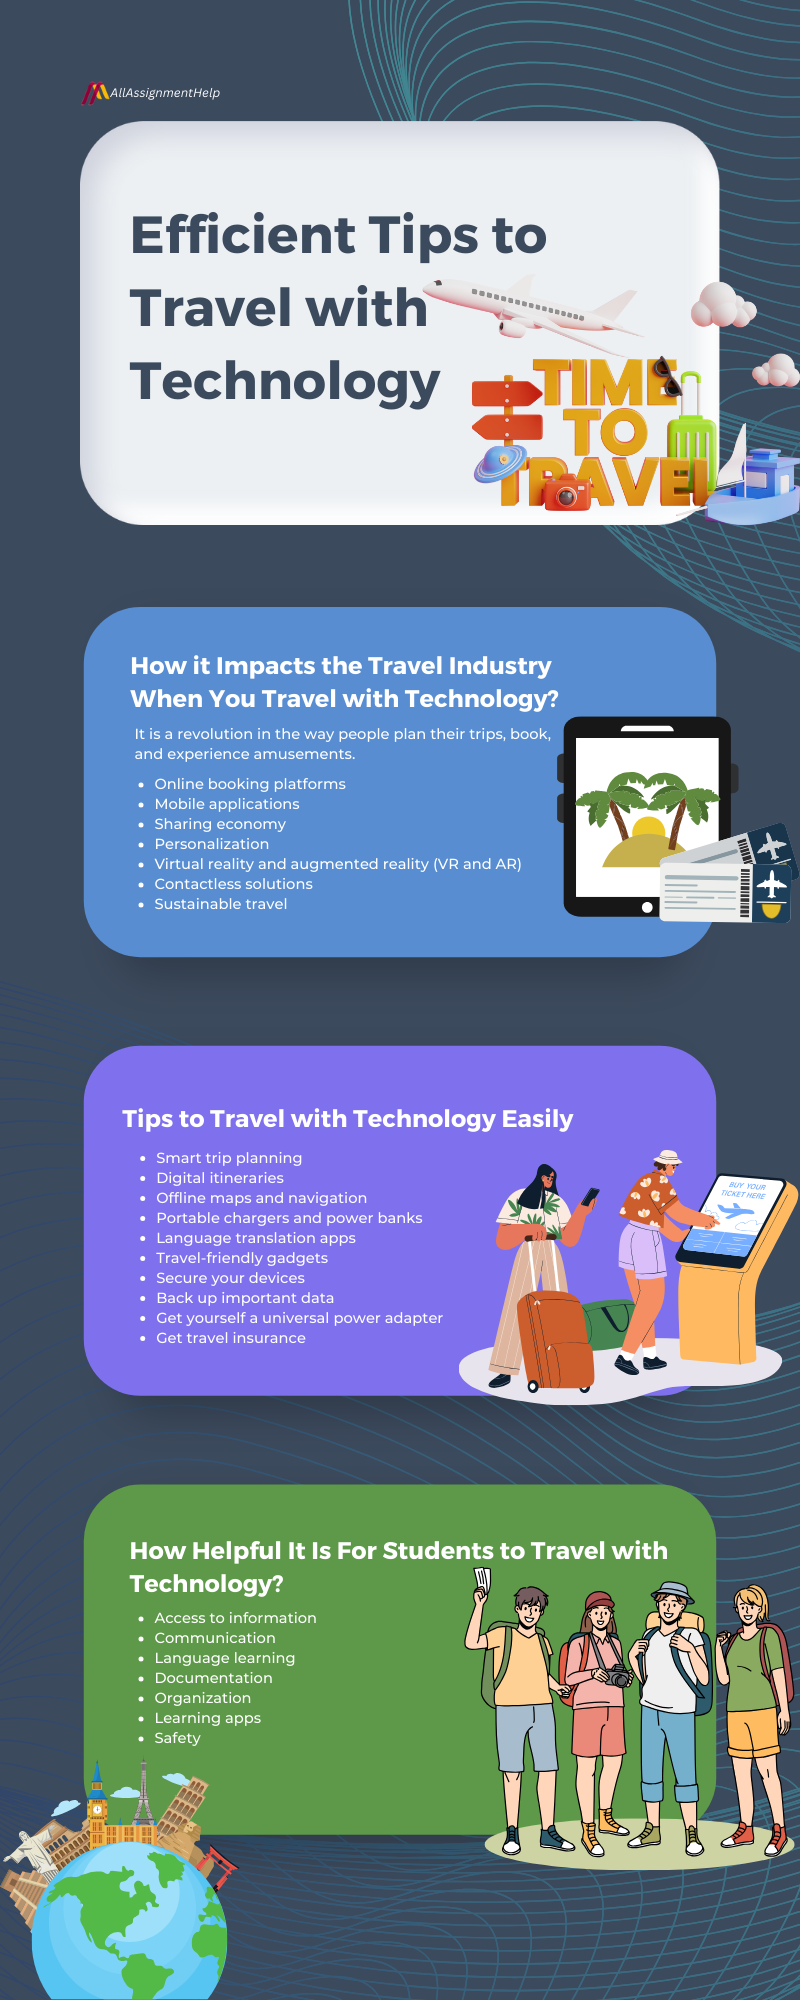 Efficient-Tips-to-Travel-with-Technology.png
